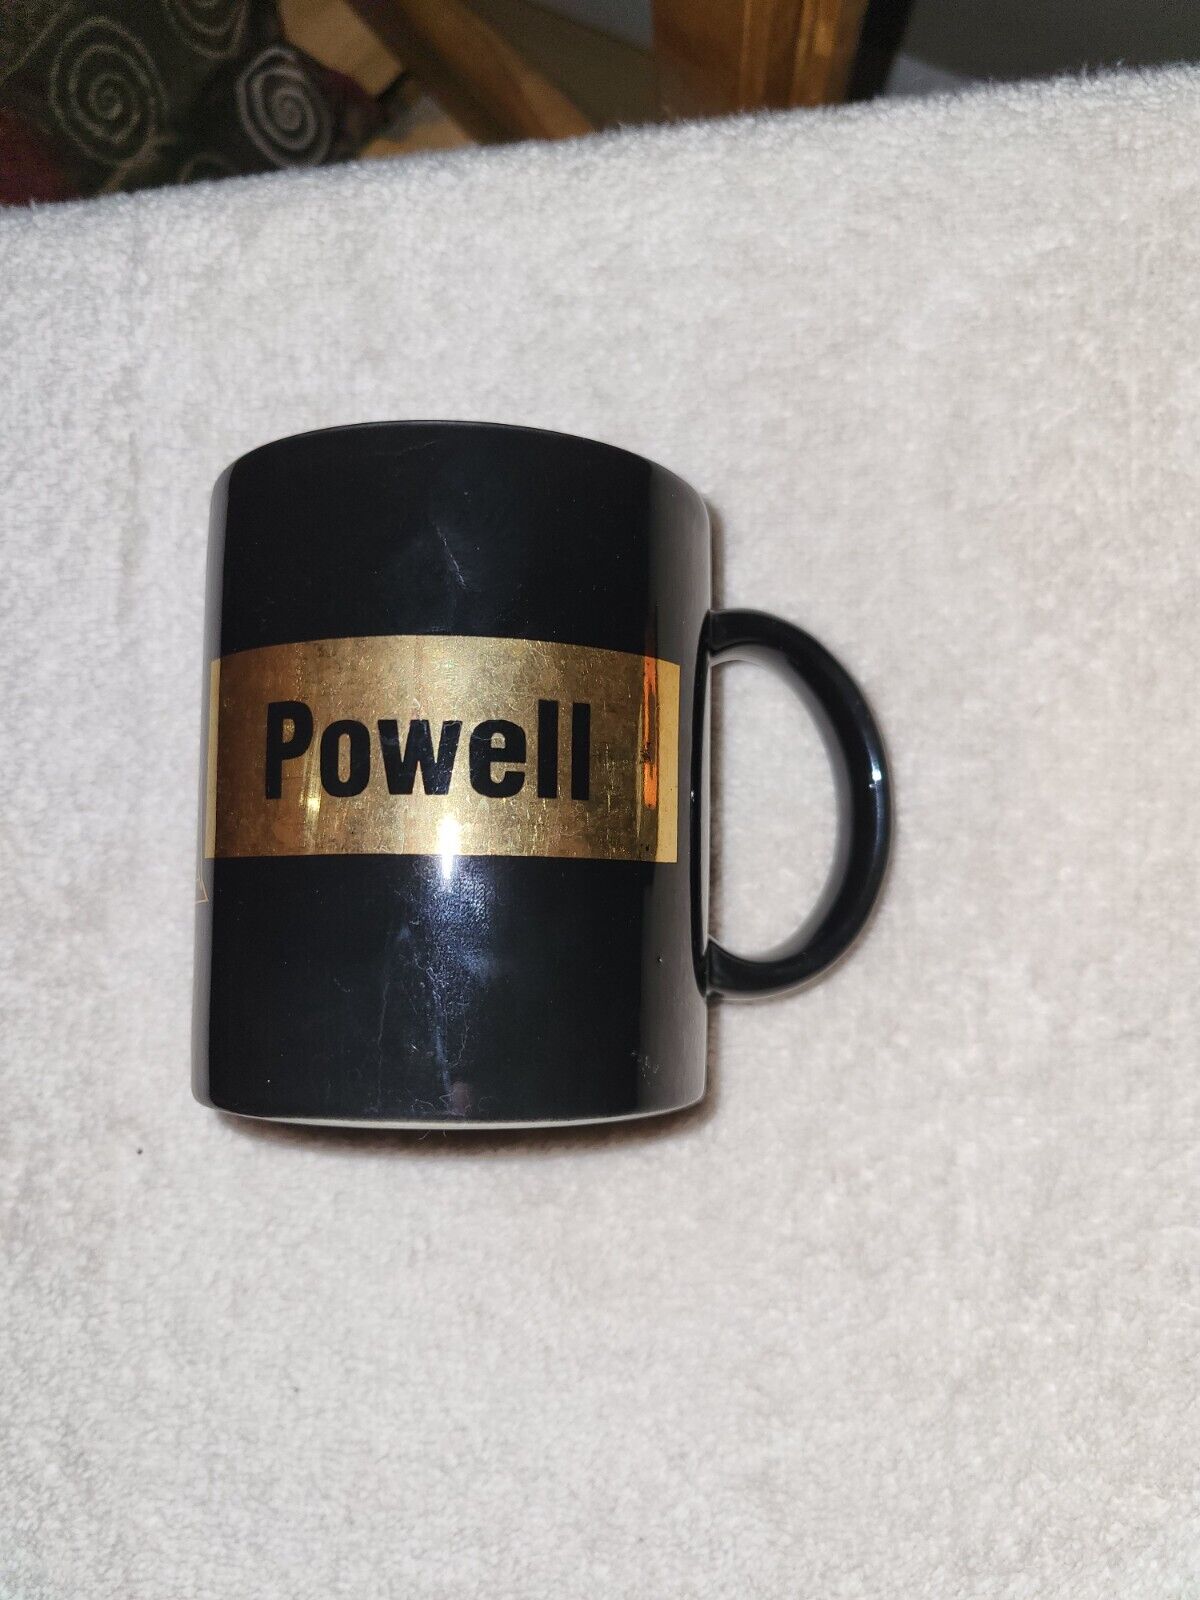 VINTAGE POWELL HEAVY EQUIPMENT MUG GUC SEE PICTURES